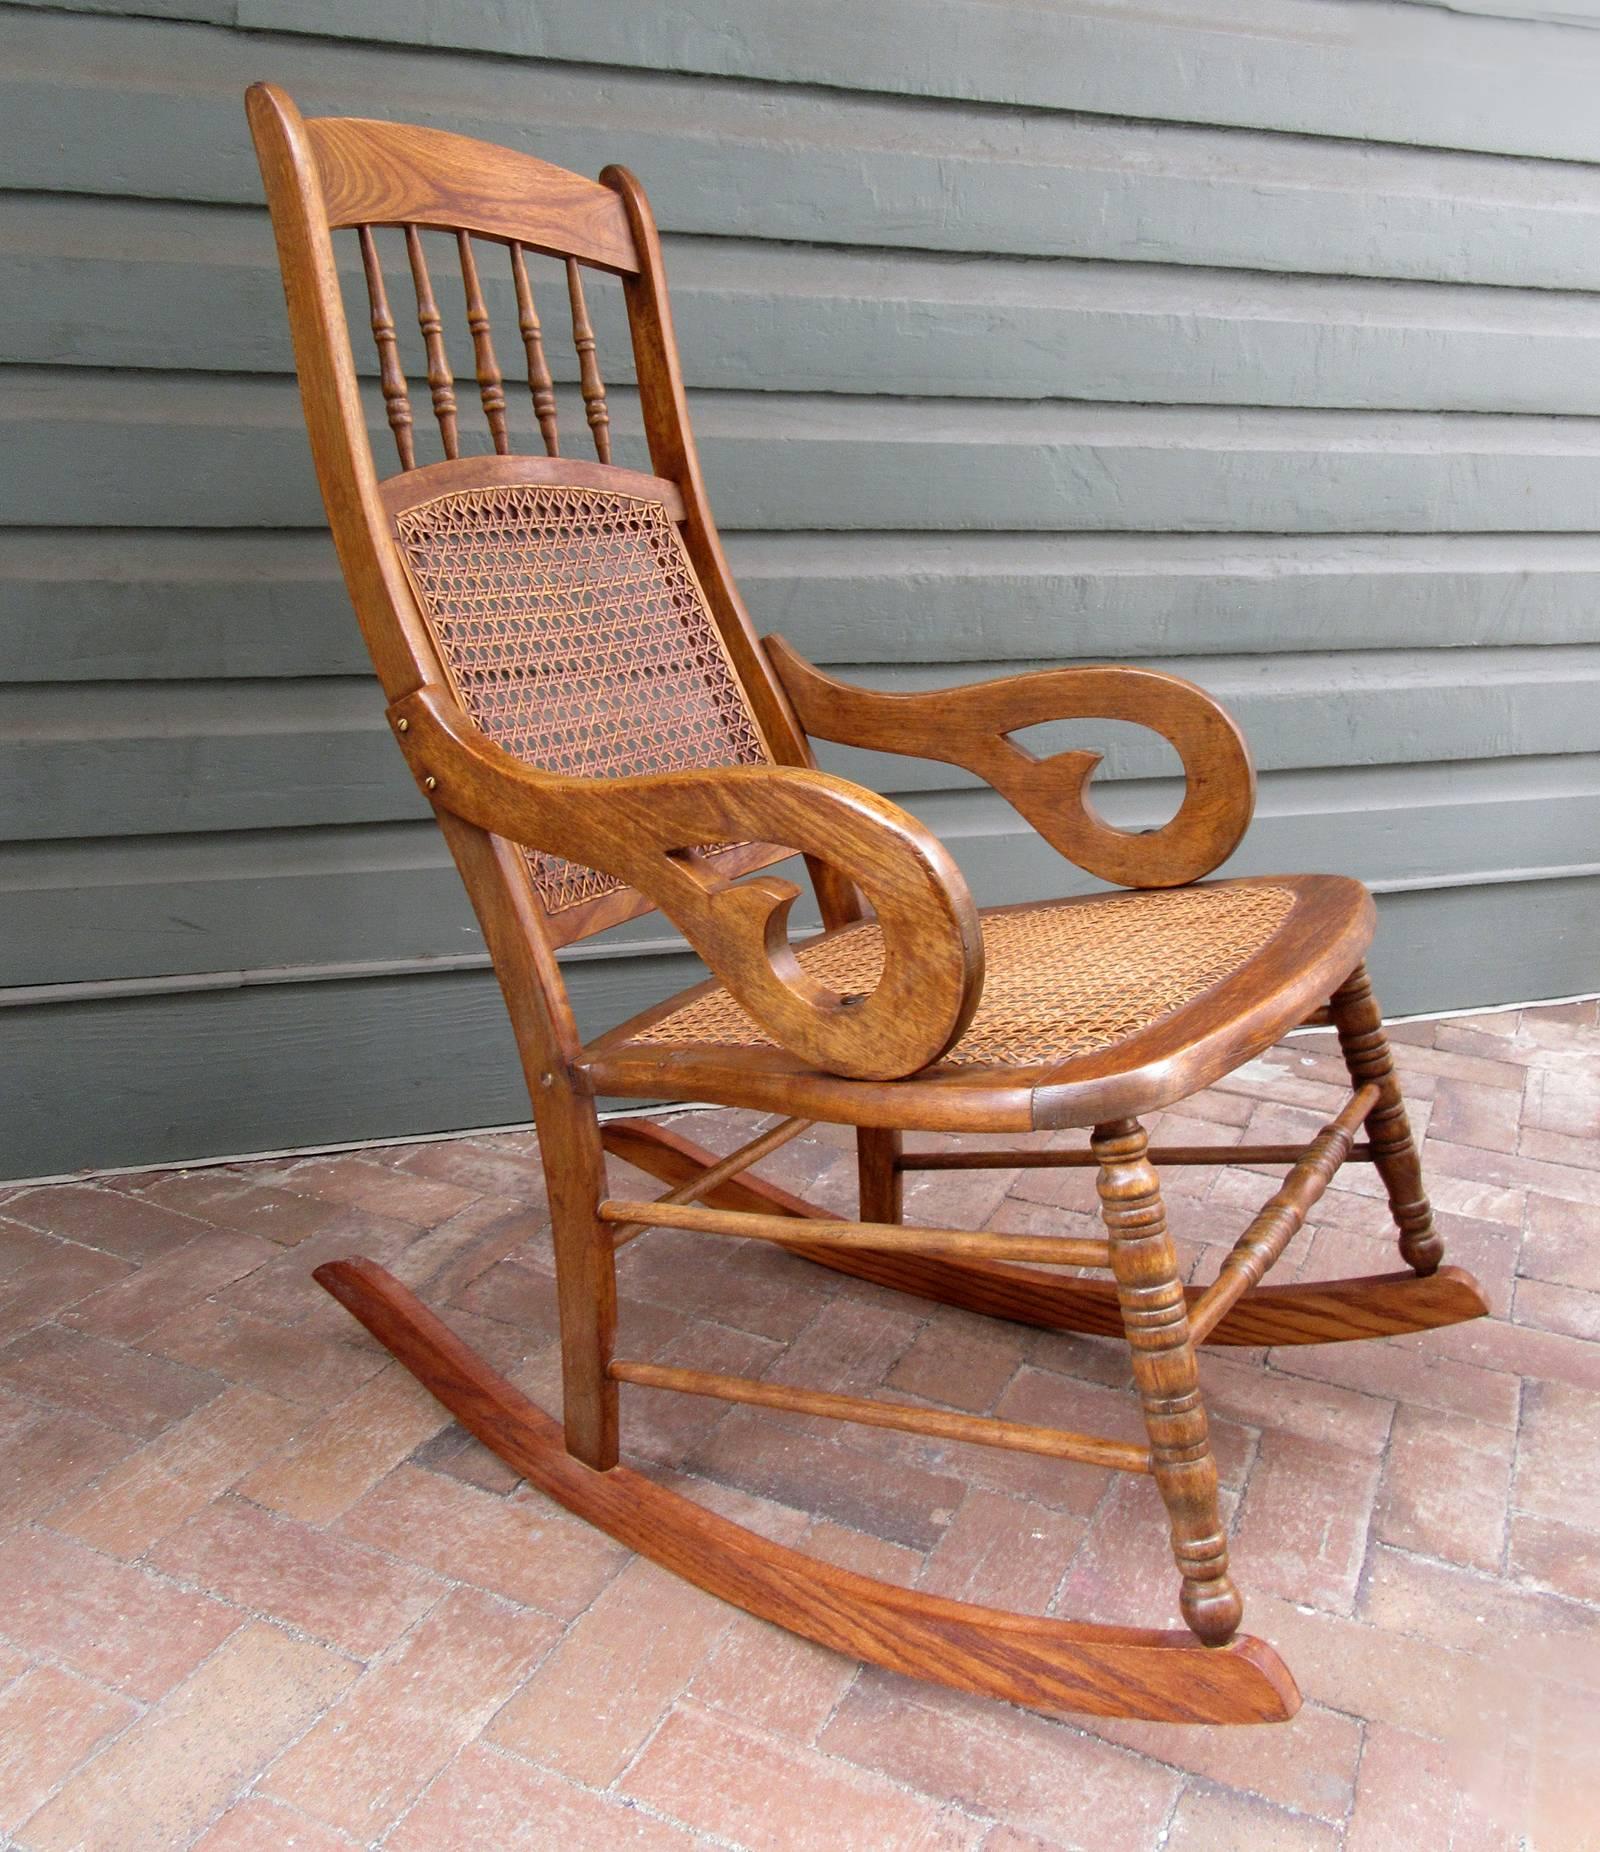 Virgin Islands Mid-19th Century St. Croix Regency Mahogany and Cane Rocking Chair For Sale